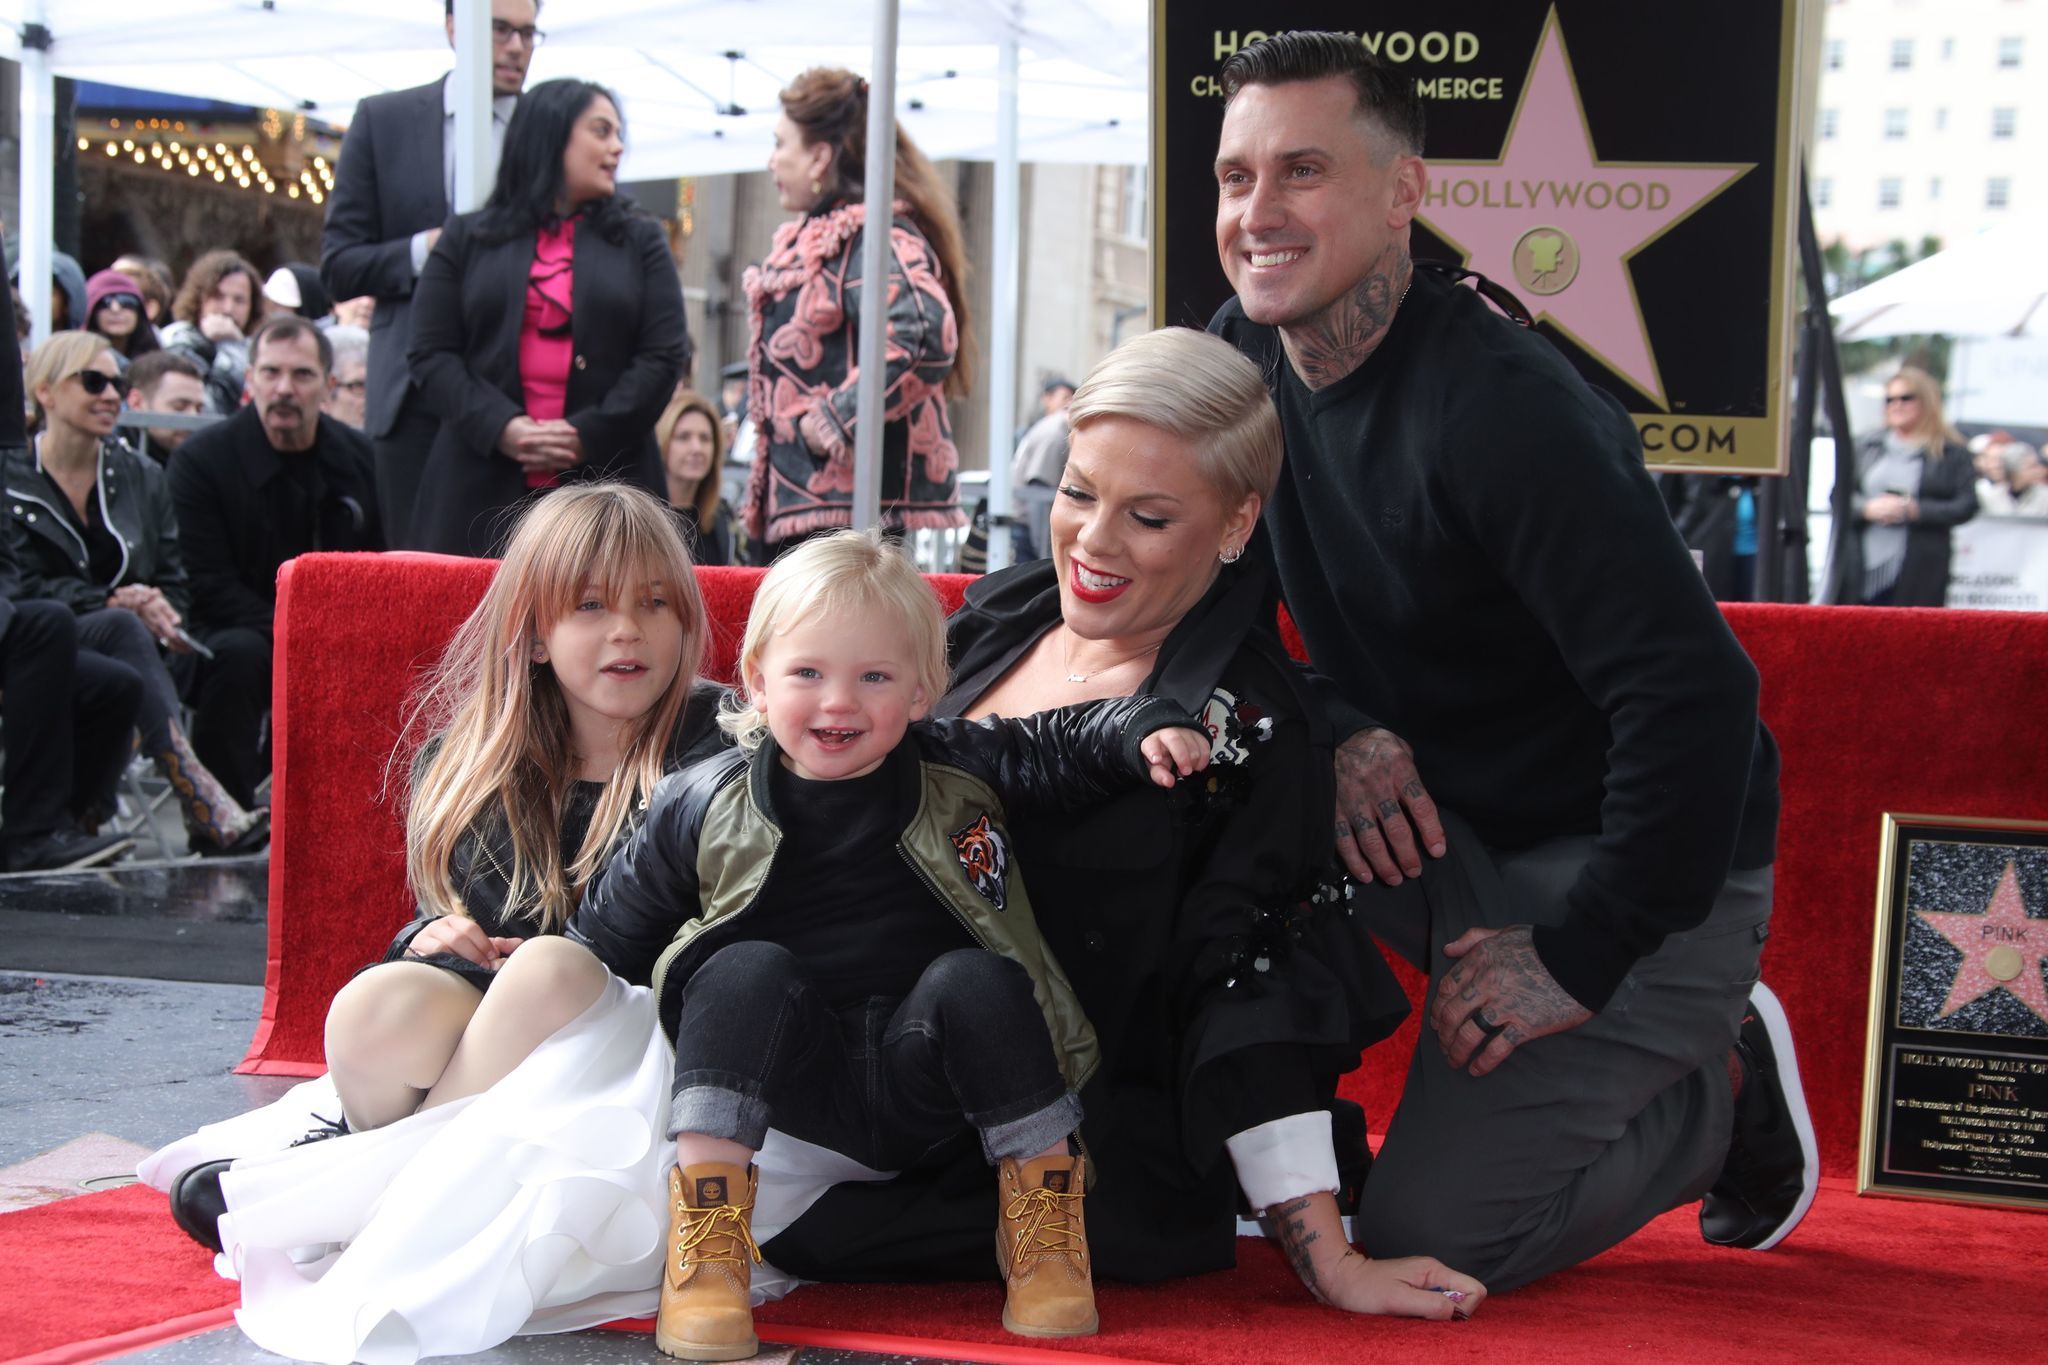 Pink had her husband, Cary Hart, and two kids, Willow Sage and Jameson, with her as she accepted her star on the Hollywood Walk of Fame. Comedian Ellen DeGeneres was one of the celebs who came out to honor Pink on her big day.